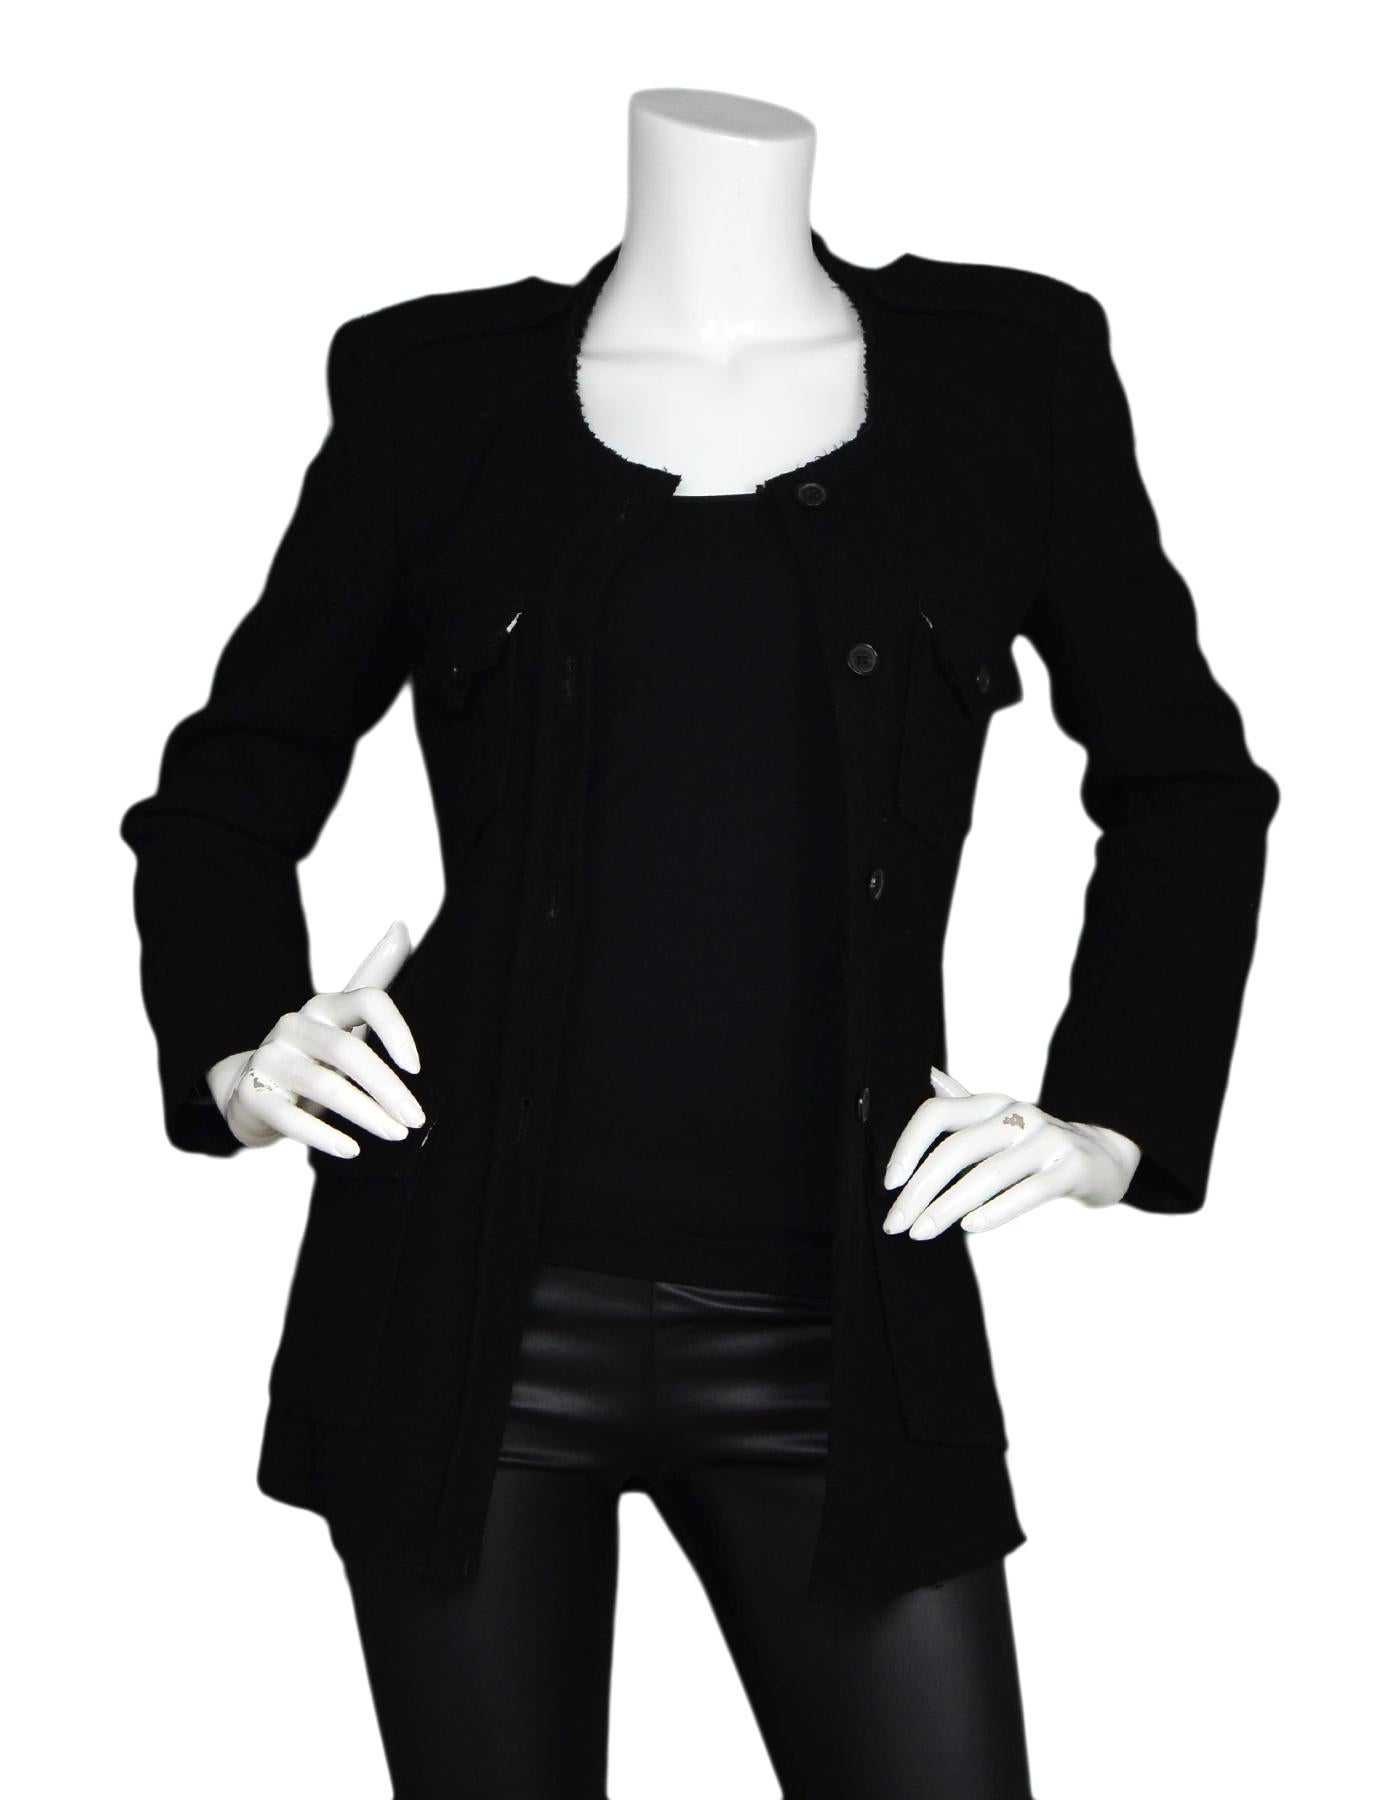 Isabel Marant Black Wool Blend Button Up Military Style Jacket W/ Raw Hem Detail Sz 38

Made In: Lithuania 
Color: Black
Materials: 70% wool, 30% polyamide
Opening/Closure: Button up
Overall Condition: Excellent pre-owned condition 

Measurements: